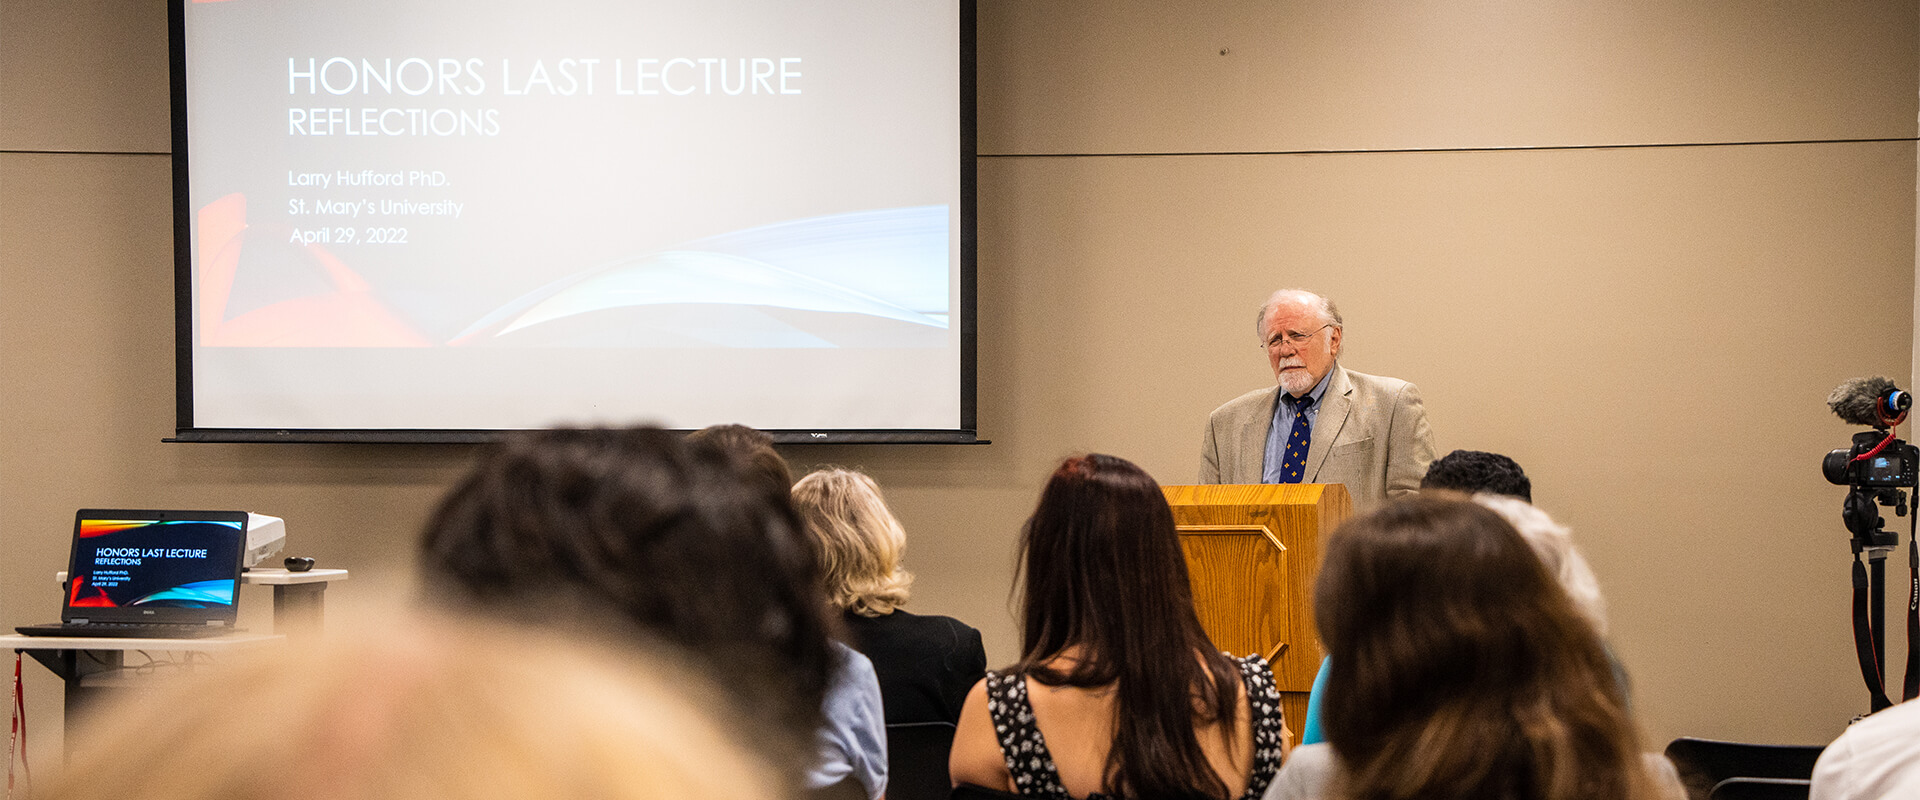 Larry Hufford, Ph.D., gives his final lecture at St. Mary's University.